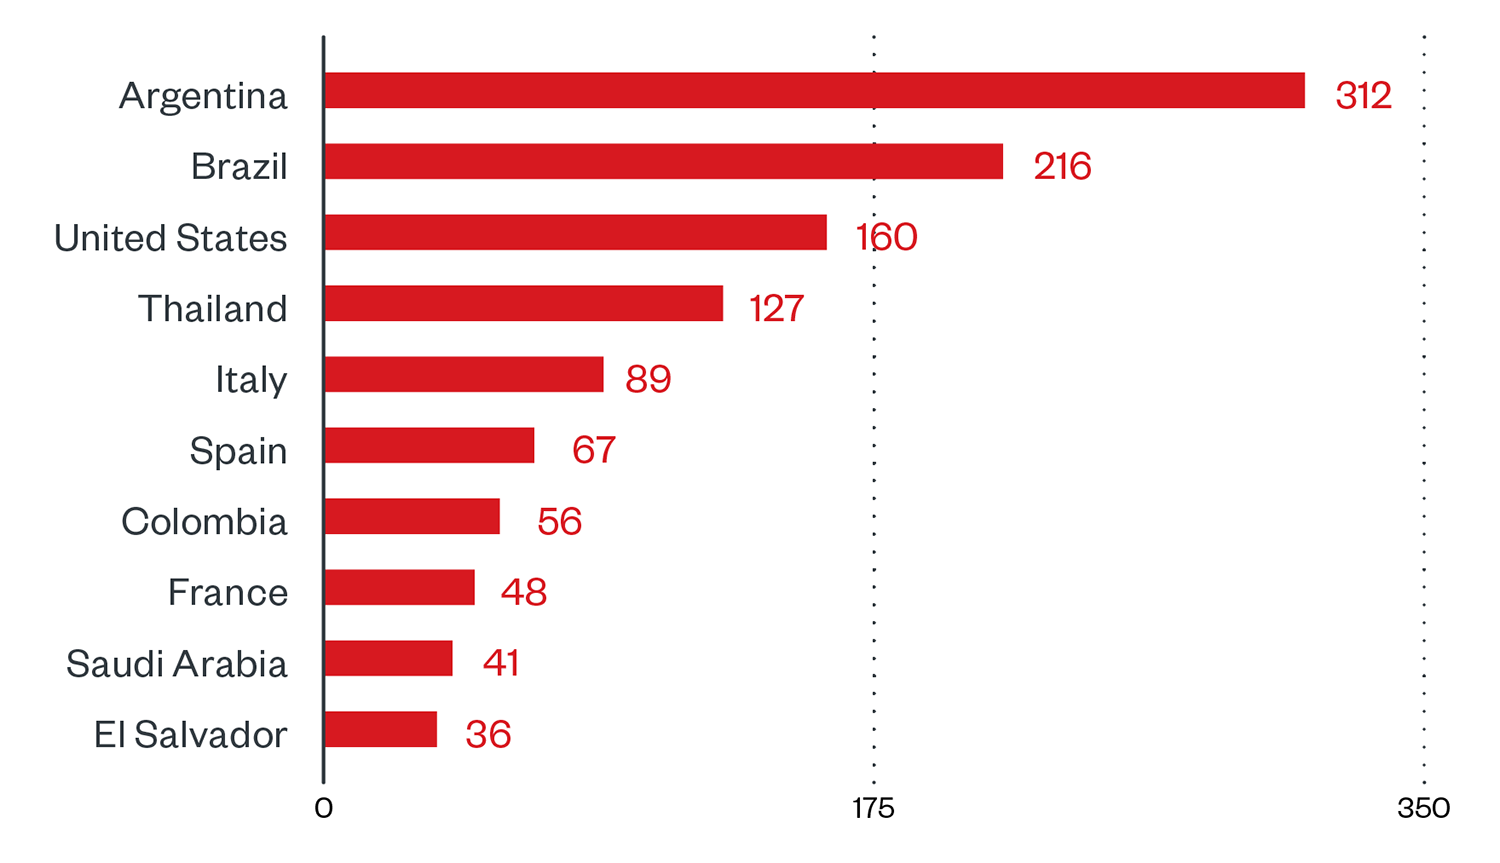 10 countries with the highest number of attack attempts per machine for Hive ransomware (August 1, 2021 to February 28, 2022)